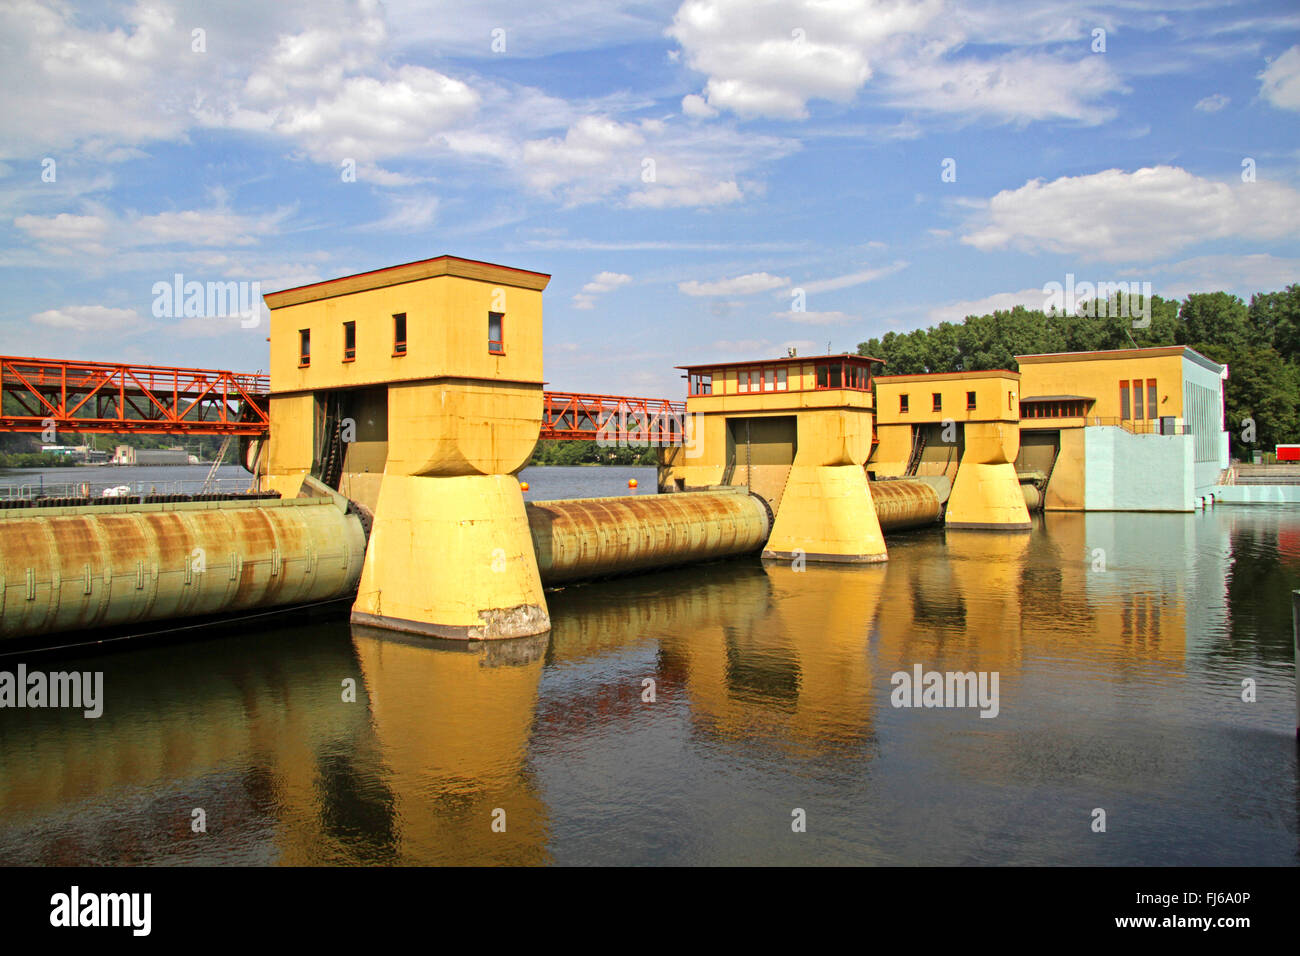 hydro dam and hydroelectric power stations of Lake Hengsteysee, Germany, North Rhine-Westphalia, Ruhr Area, Herdecke Stock Photo